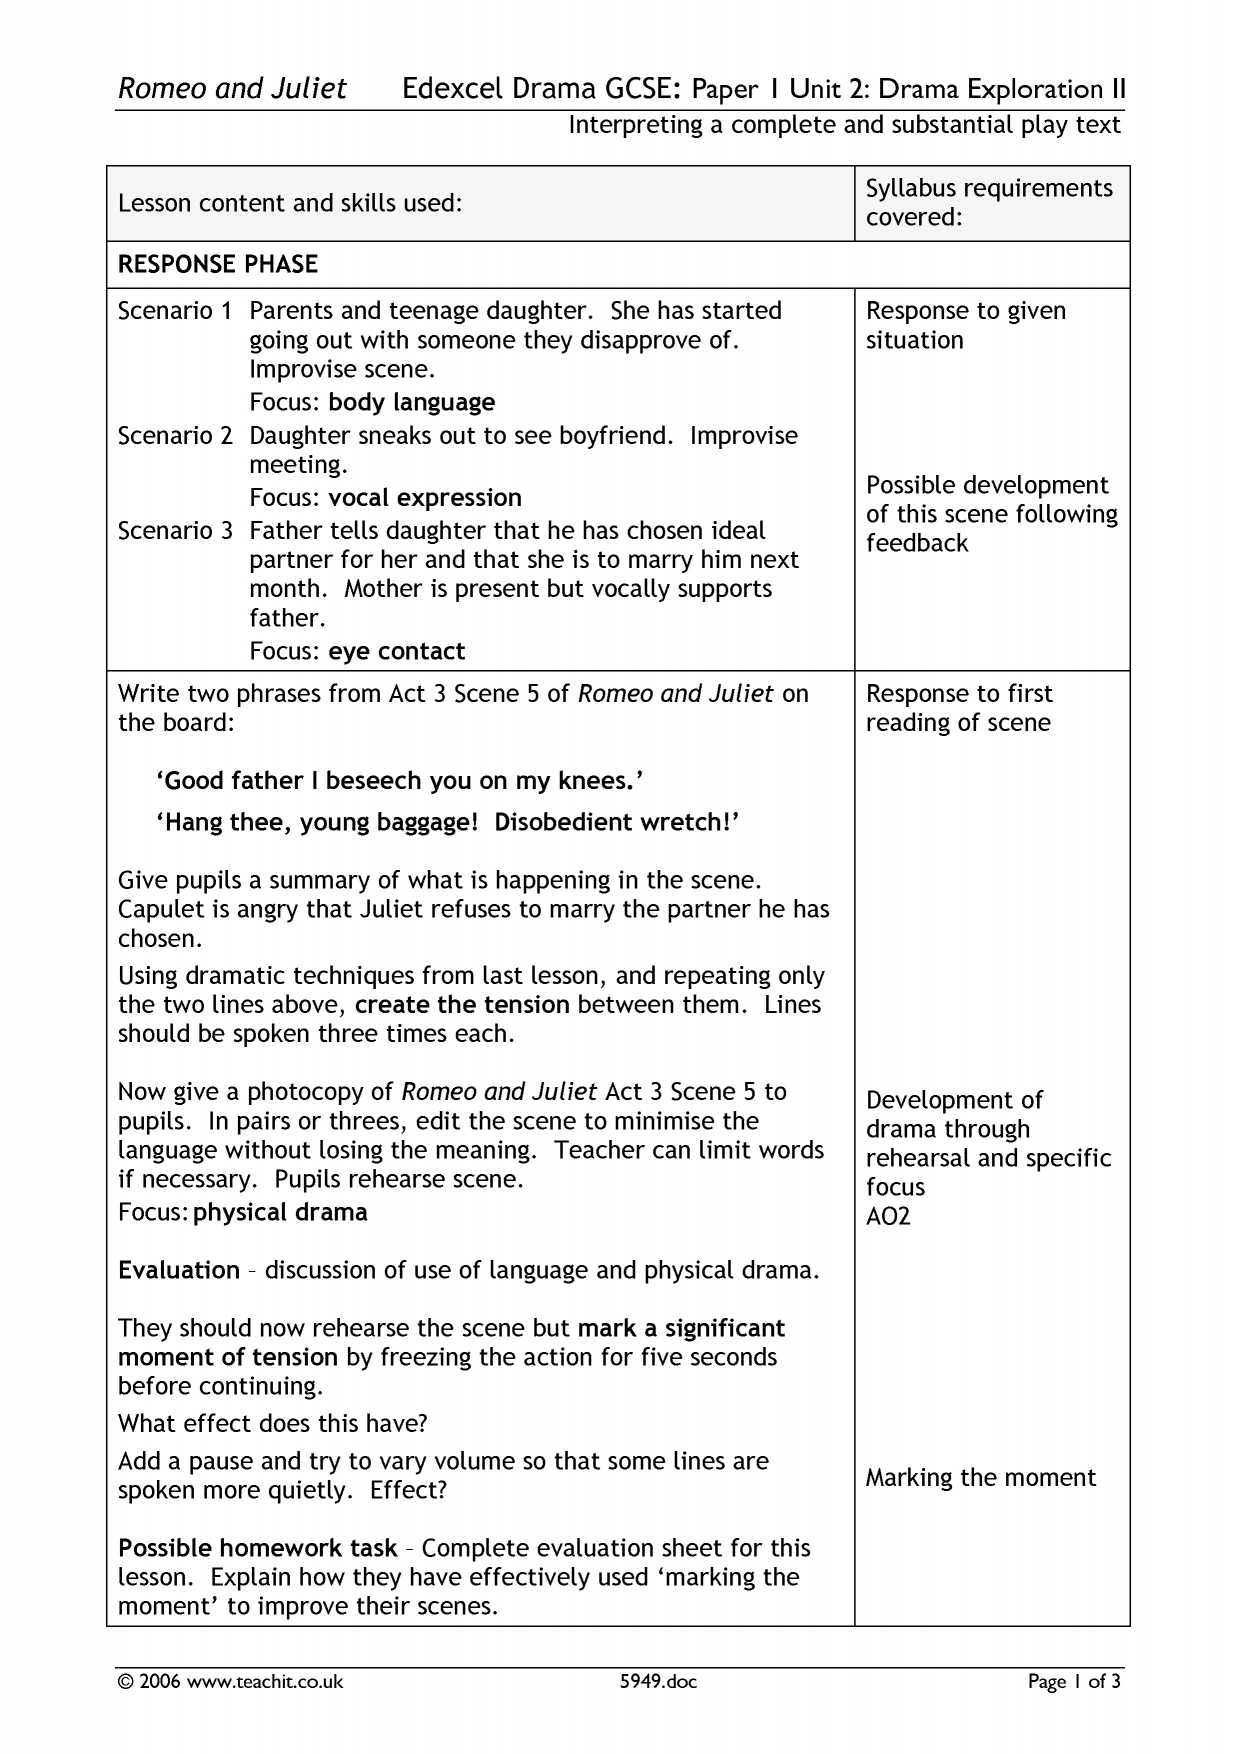 Avatar Movie Lesson Plan Worksheets or Unit Search Results Teachit English